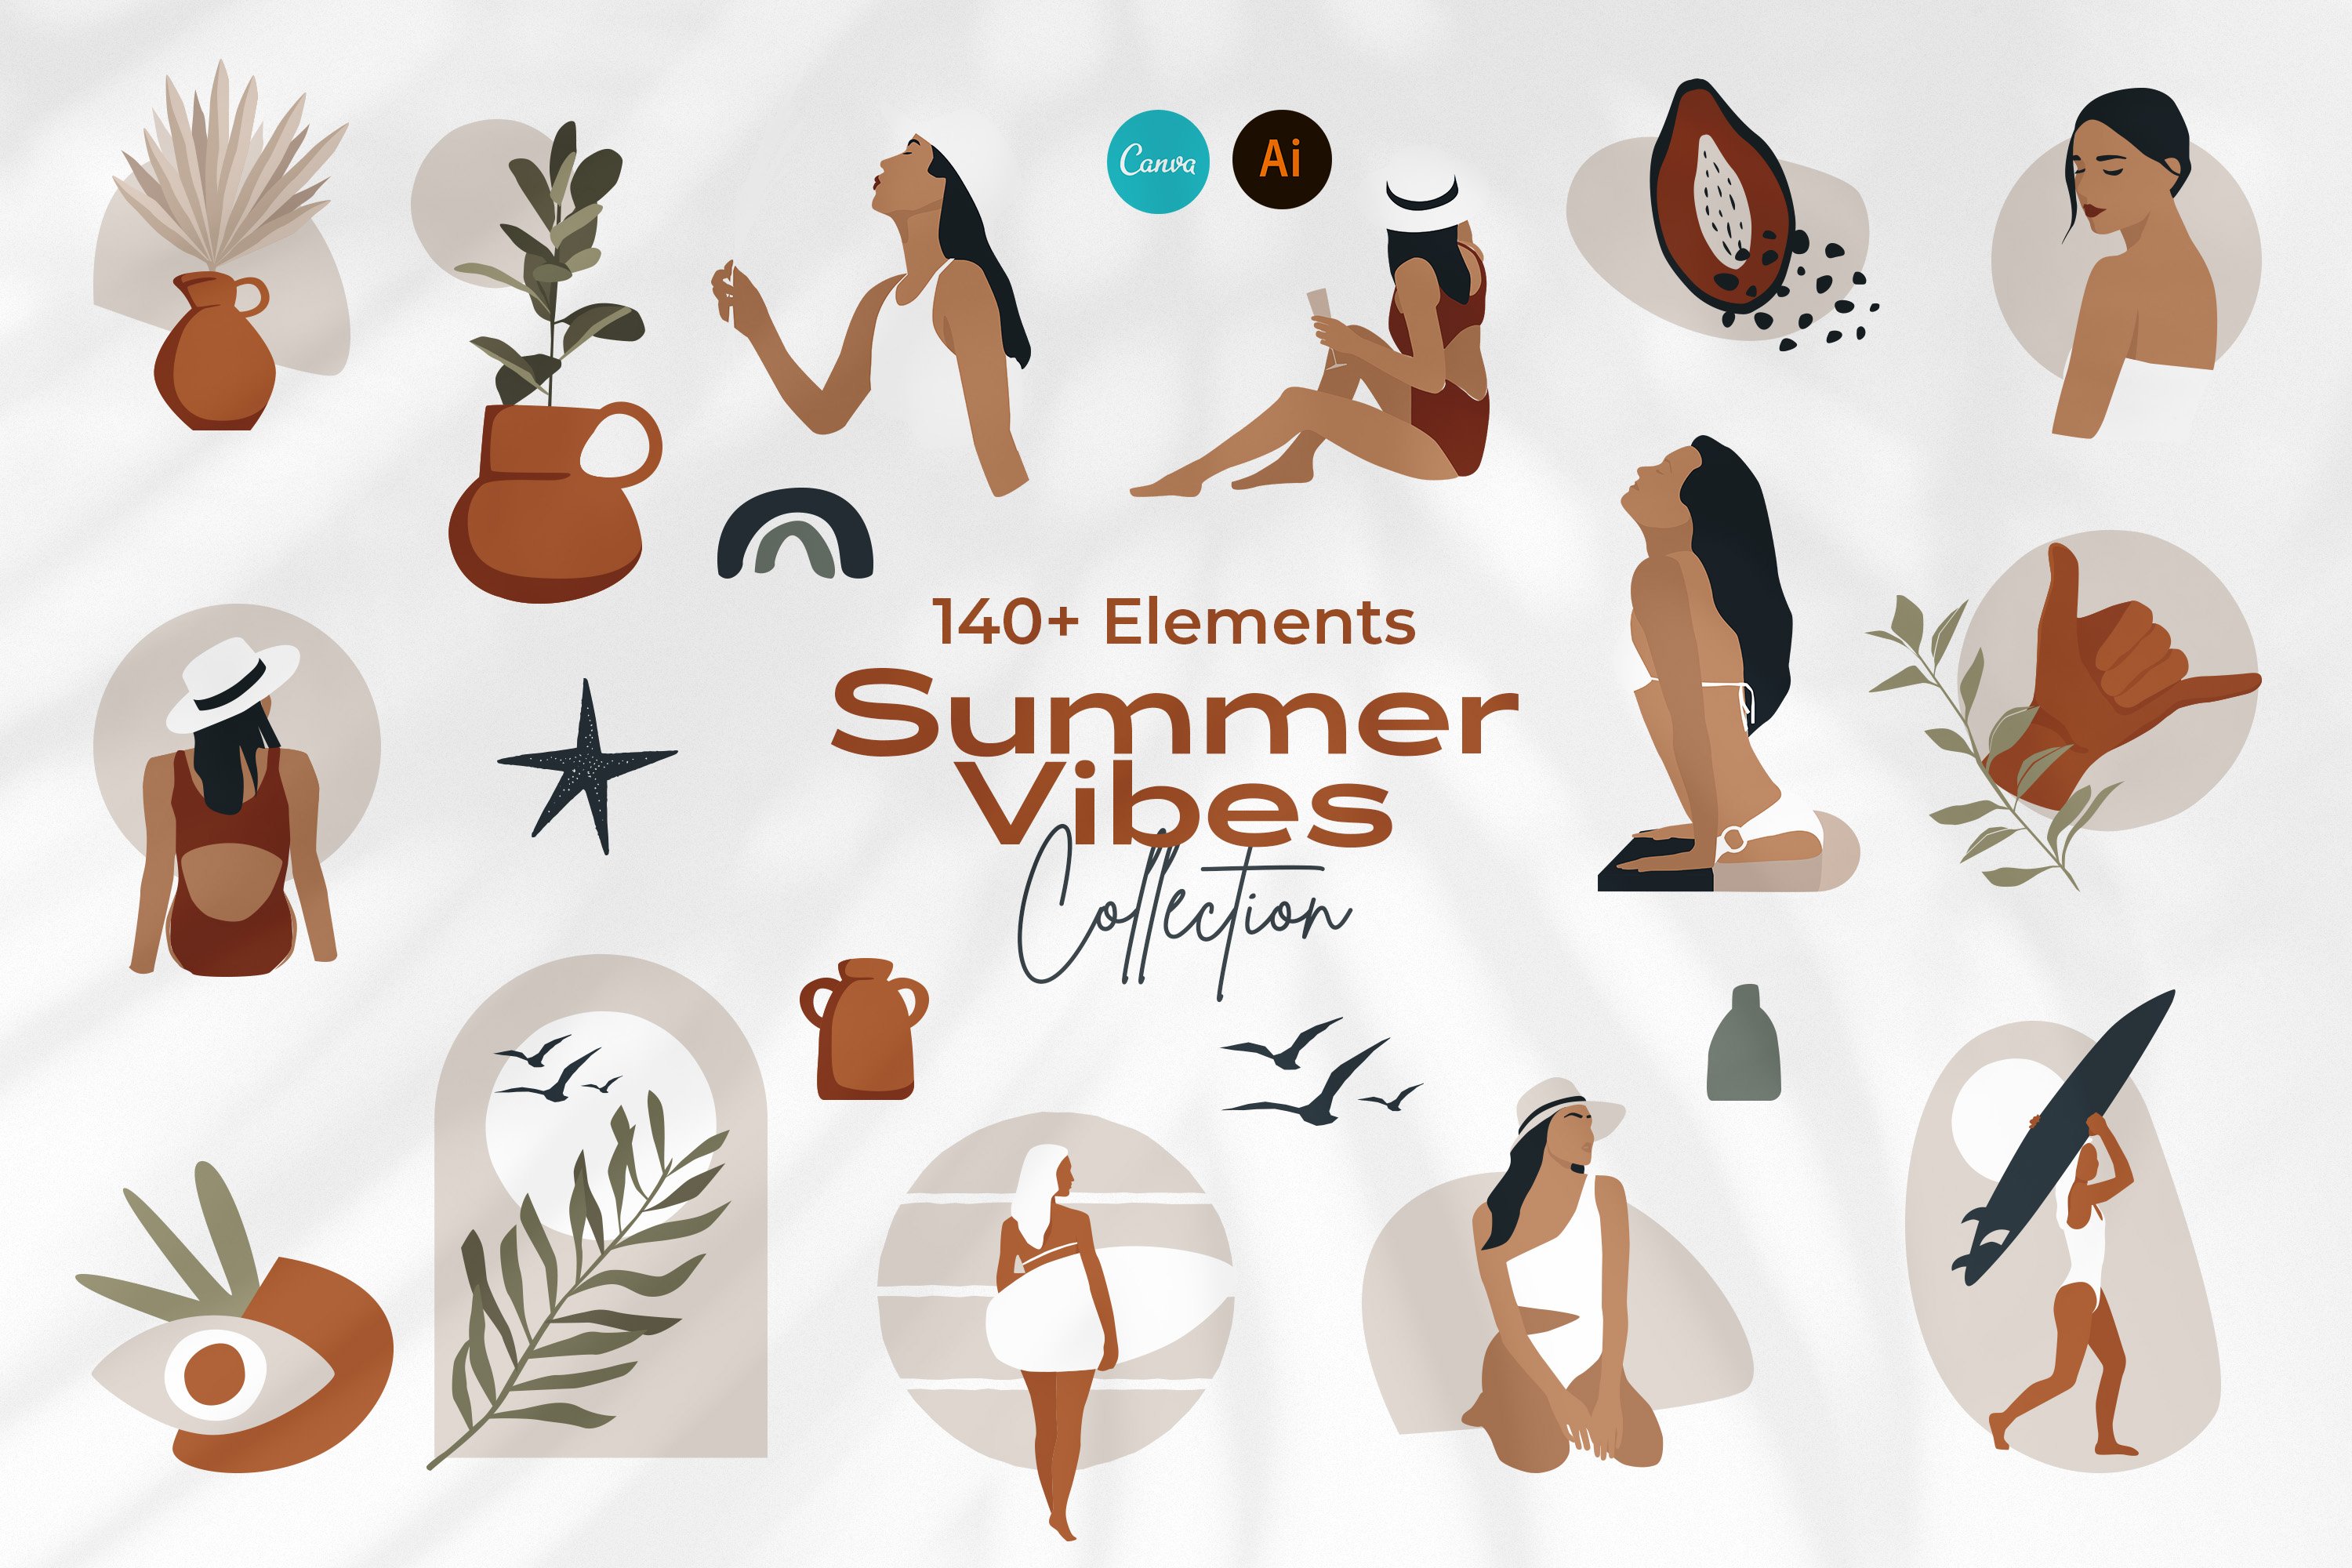 Summer Vibes Graphics Collection cover image.